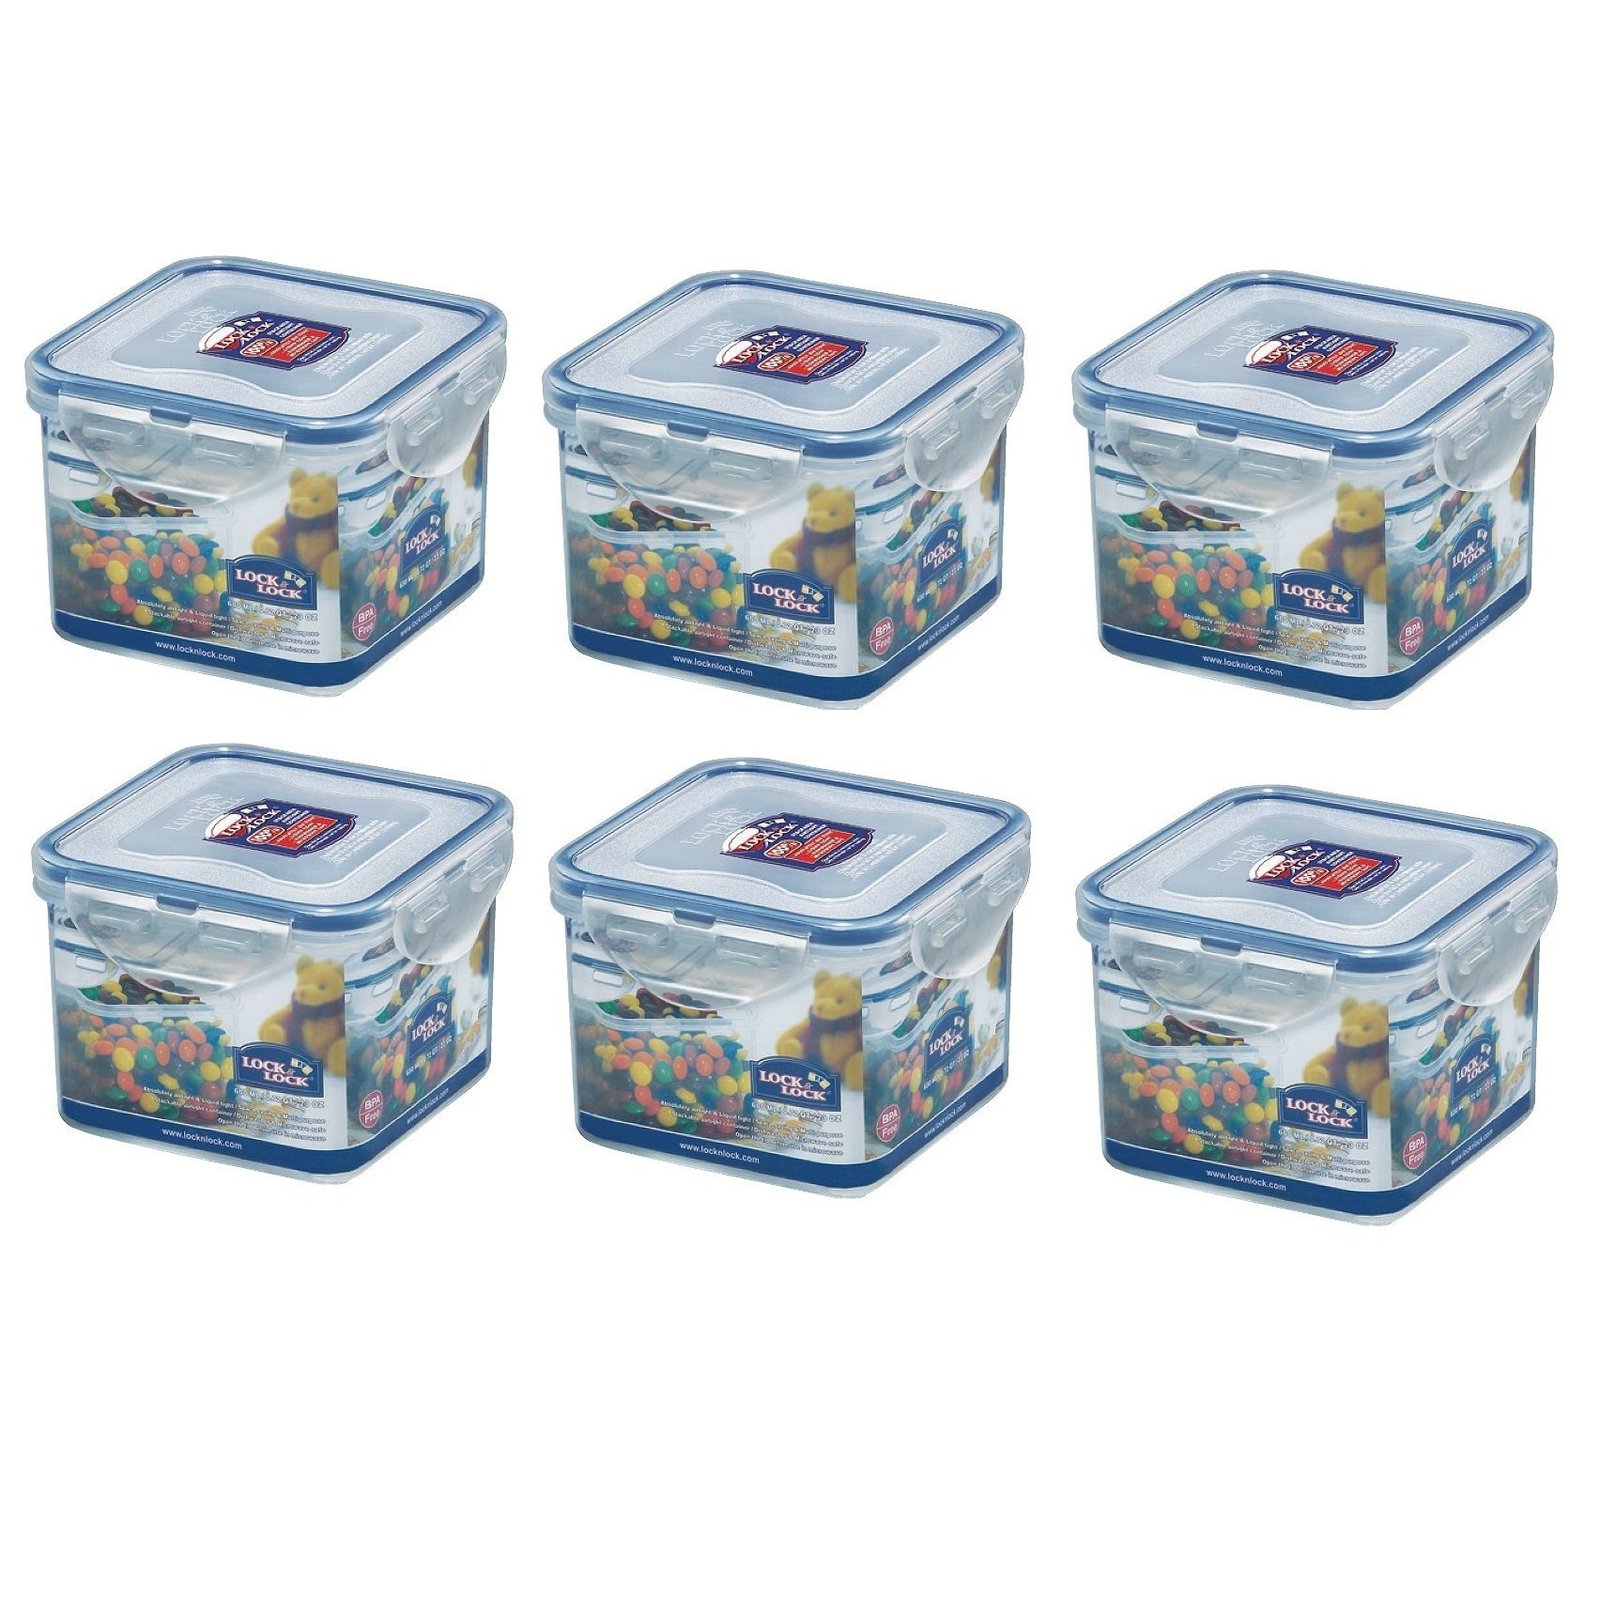 Lock & Lock, No BPA, Water Tight, Food Container, 2.8-cup, 23-oz, Pack of 6, HPL - $27.71